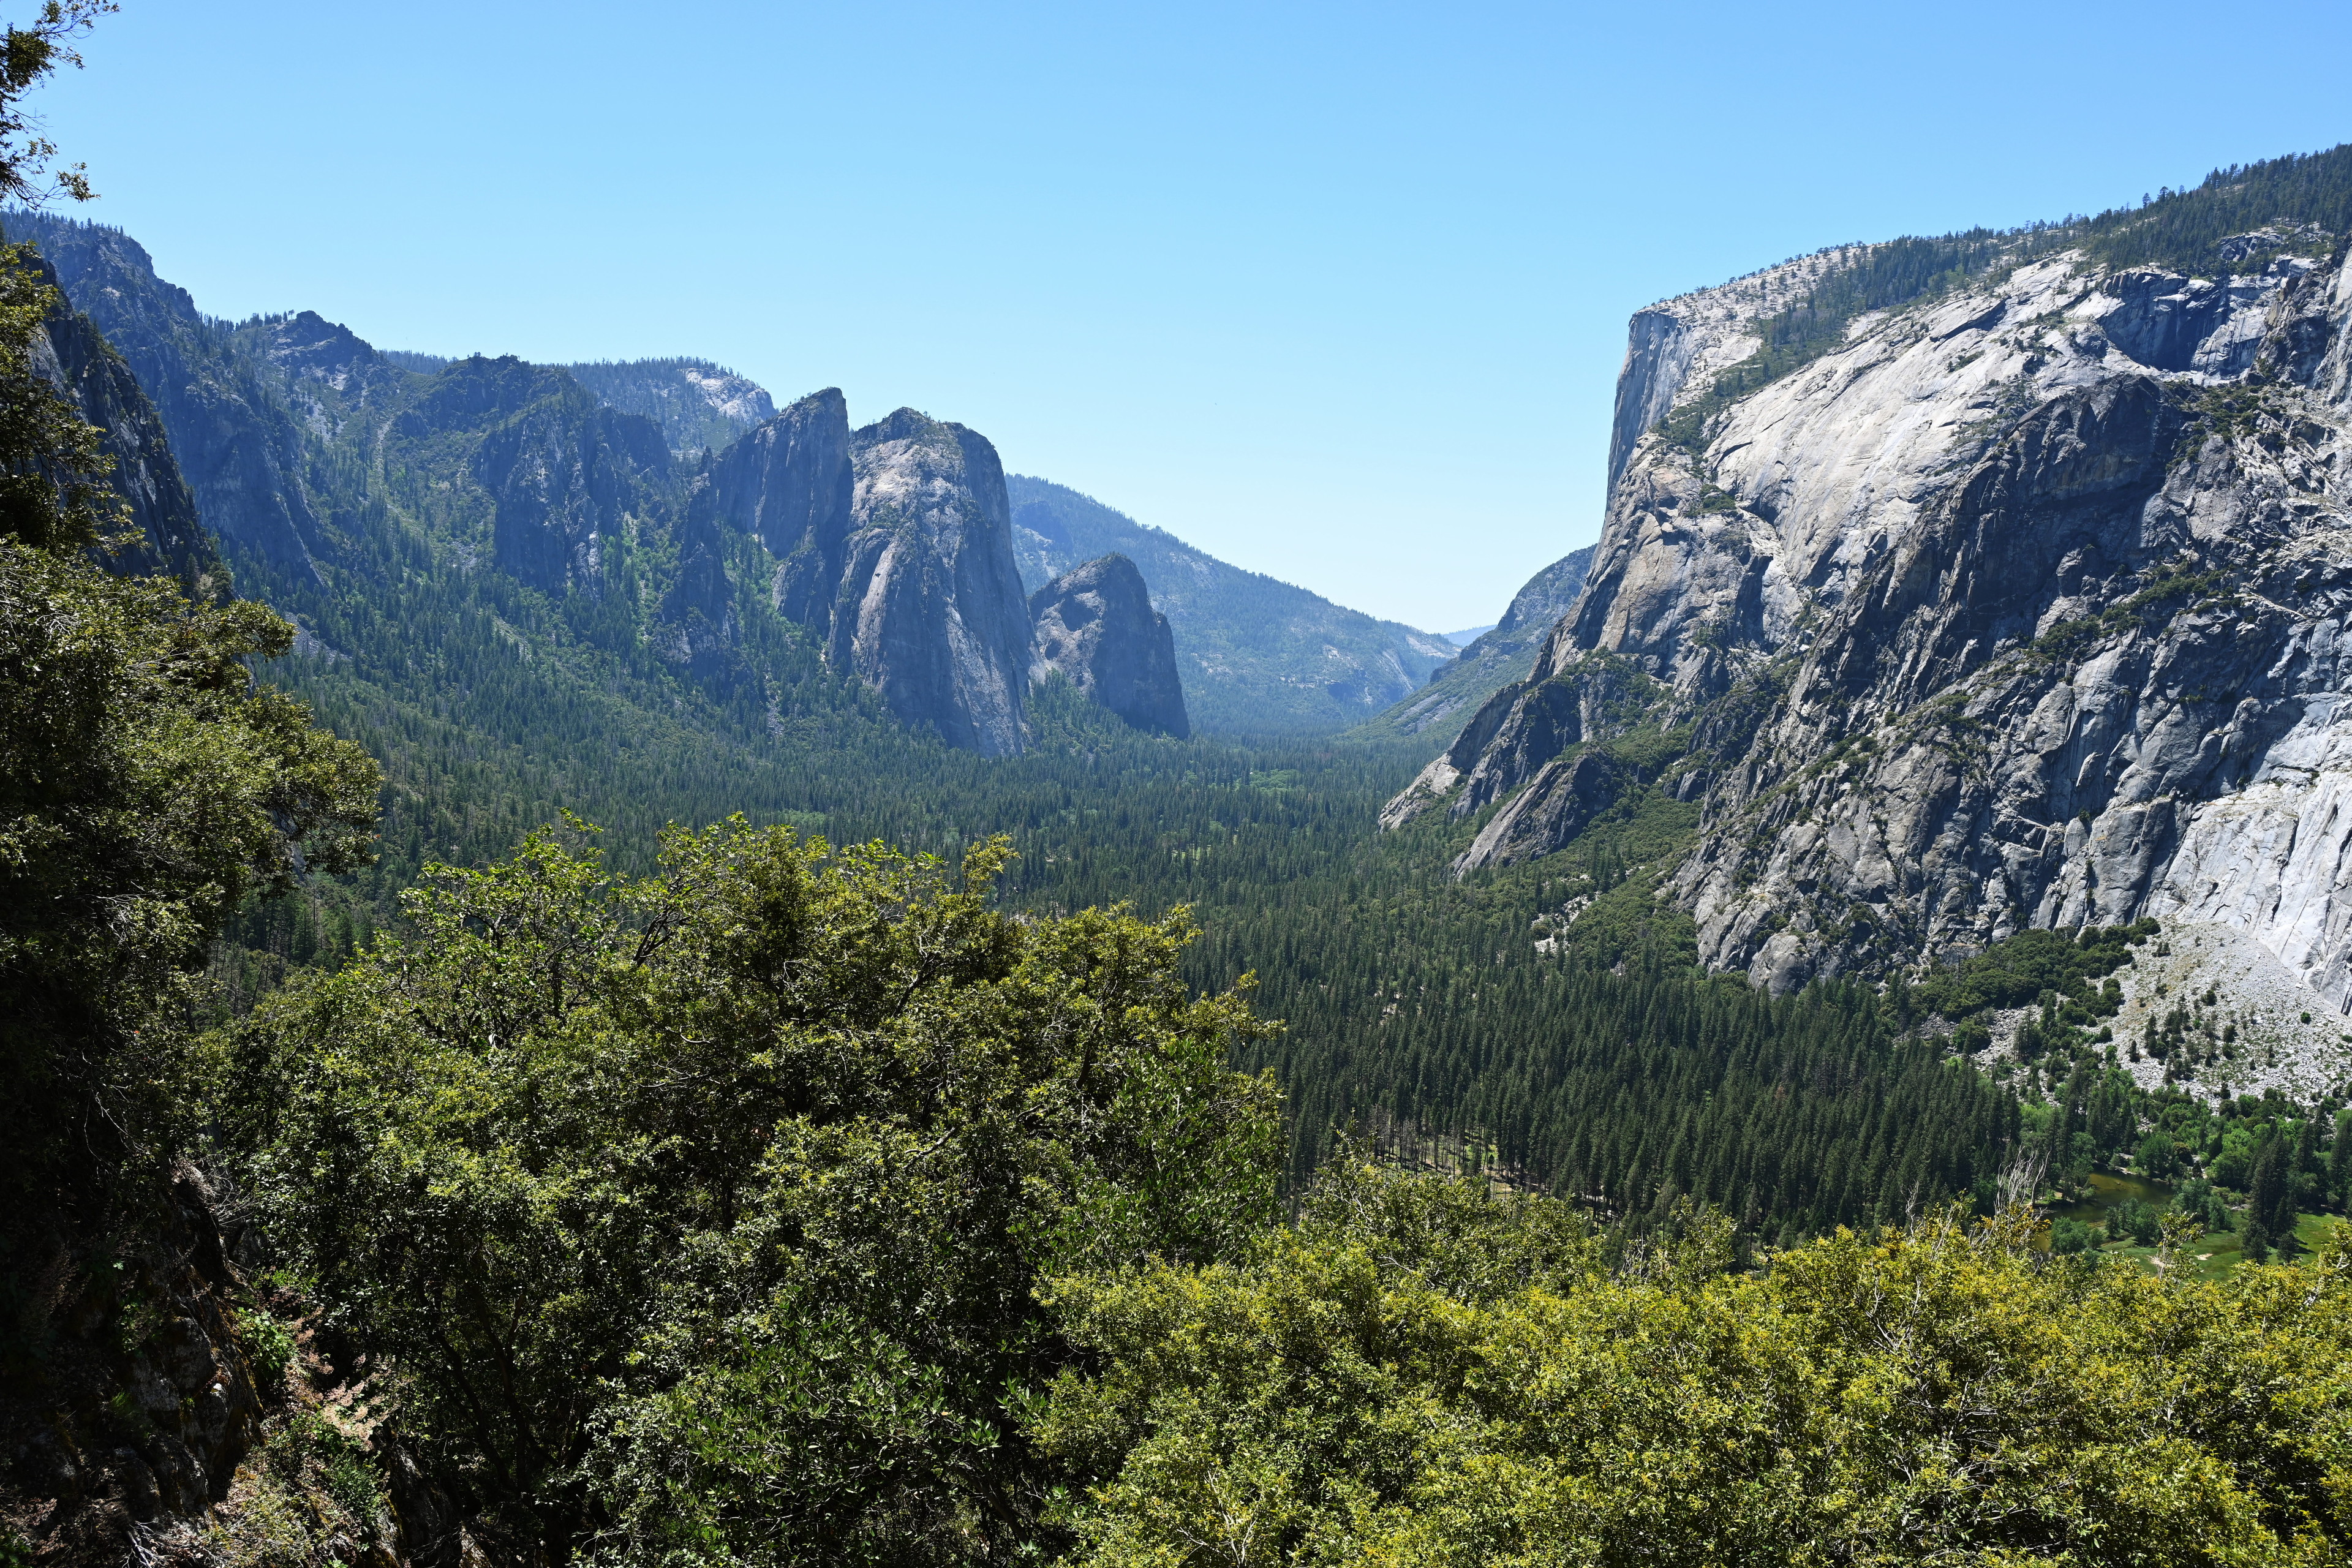 View of Yosemite Valley from the Four Mile Trail.